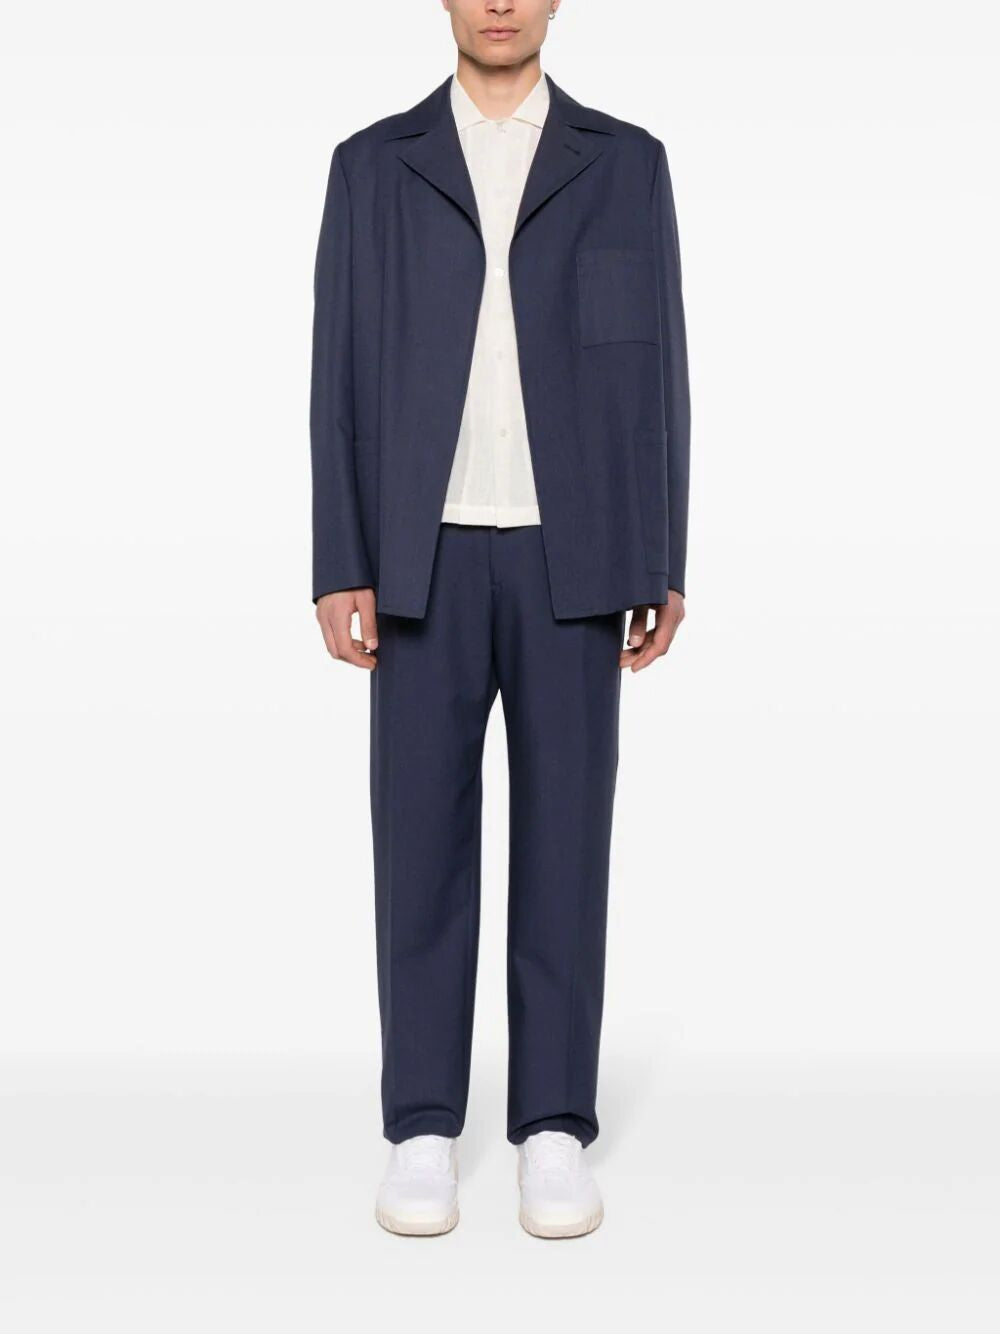 FENDI Men's Single Breasted Wool Blazer in Blue - SS24 Collection